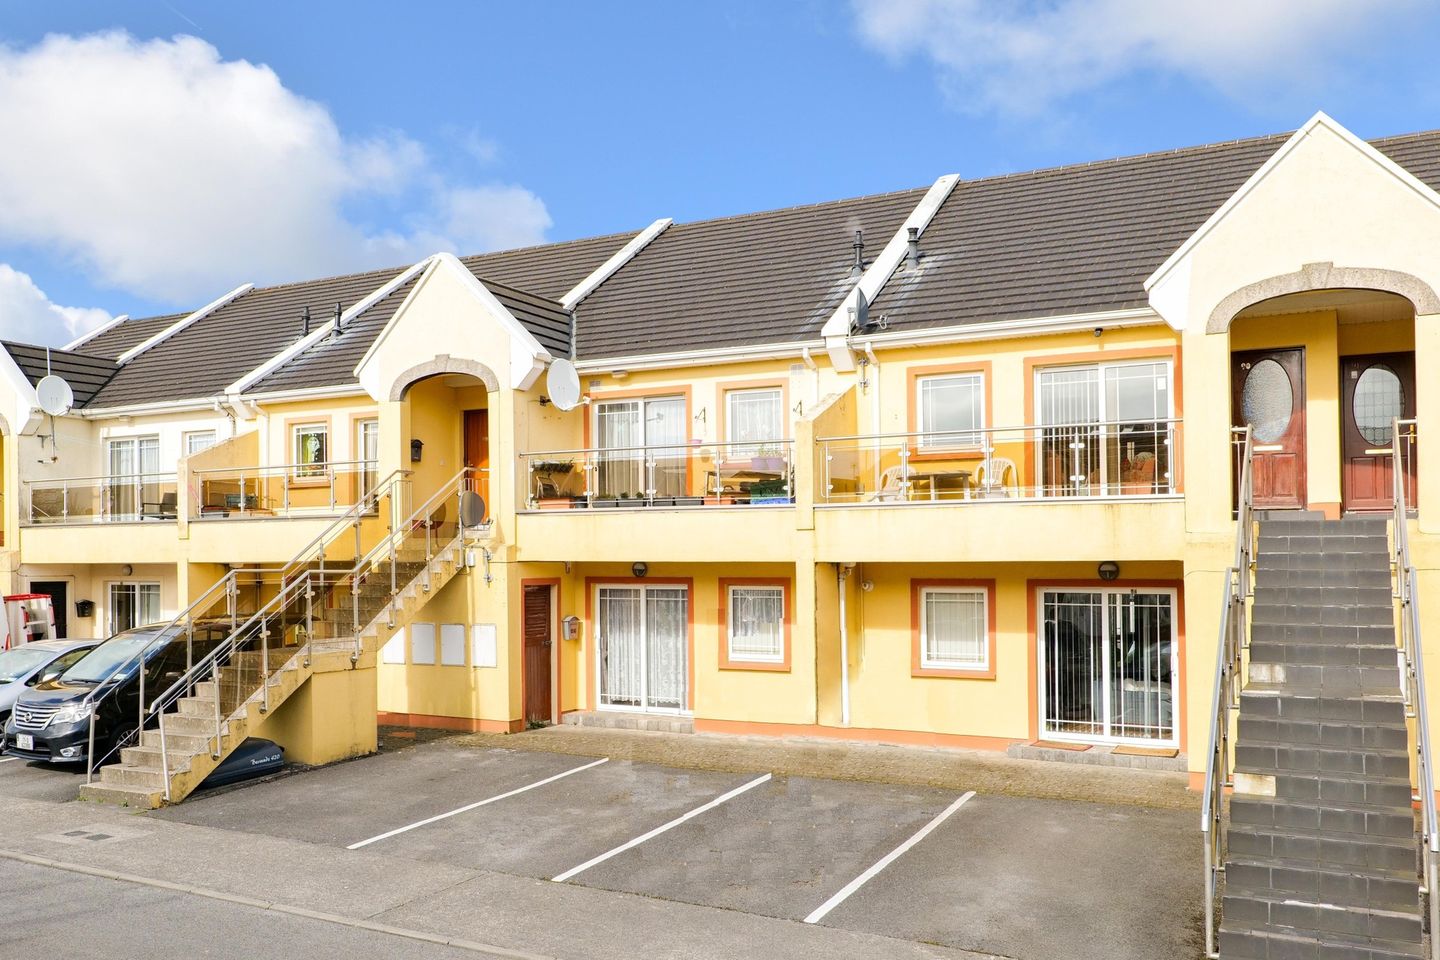 83 Frenchpark, Oranmore, Co. Galway, H91XN75